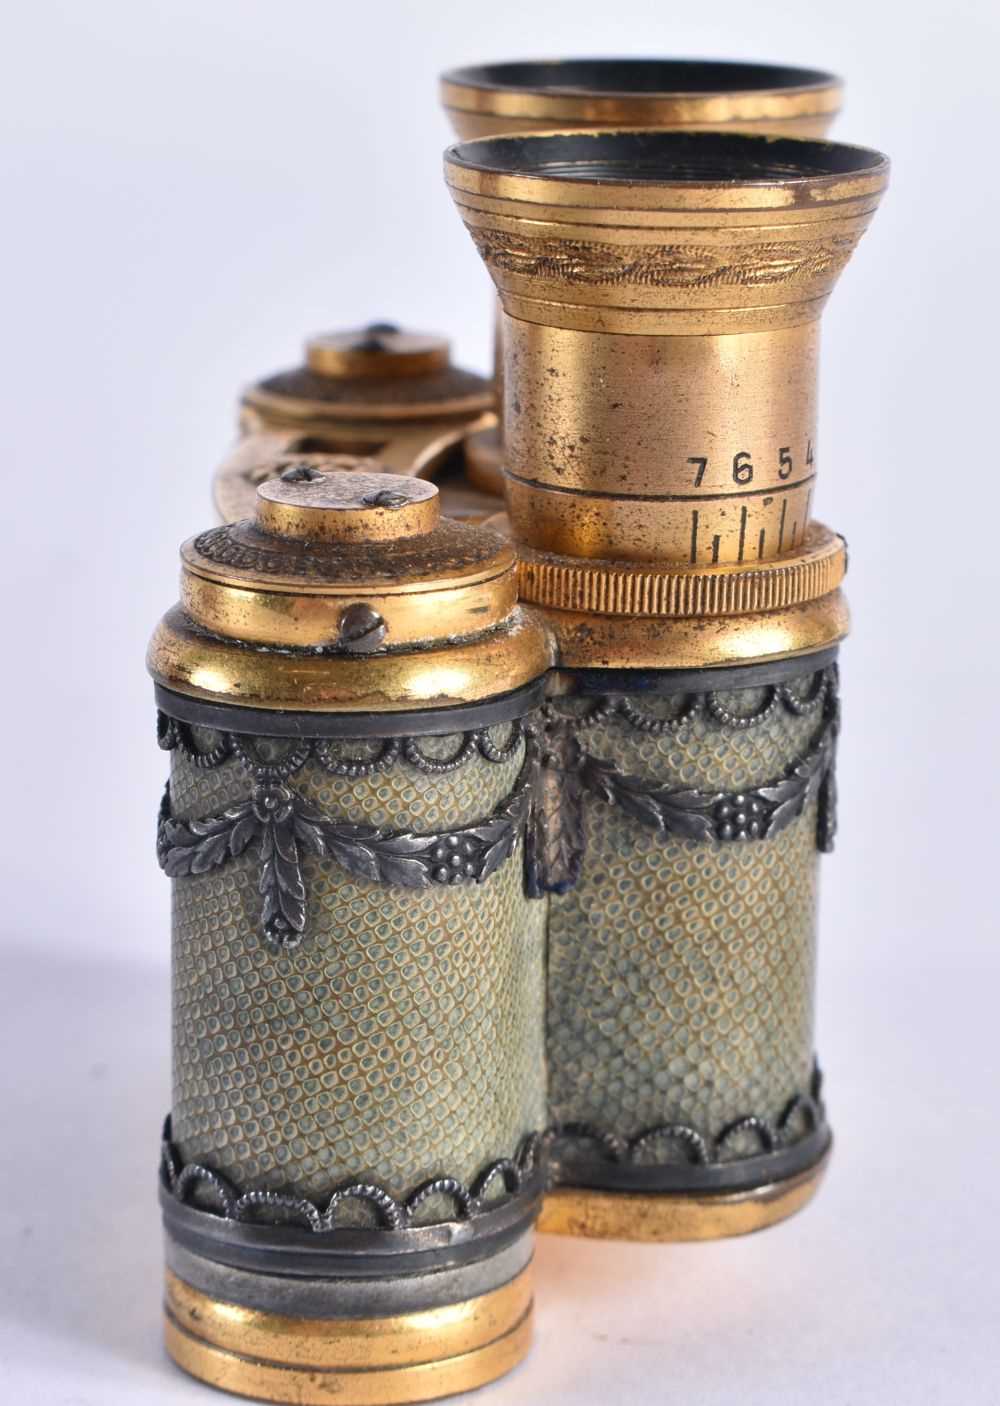 A LOVELY PAIR OF EARLY 19TH CENTURY FRENCH BRONZE SHAGREEN AND SILVER OPTICAL GLASSES signed Boin - Image 3 of 7